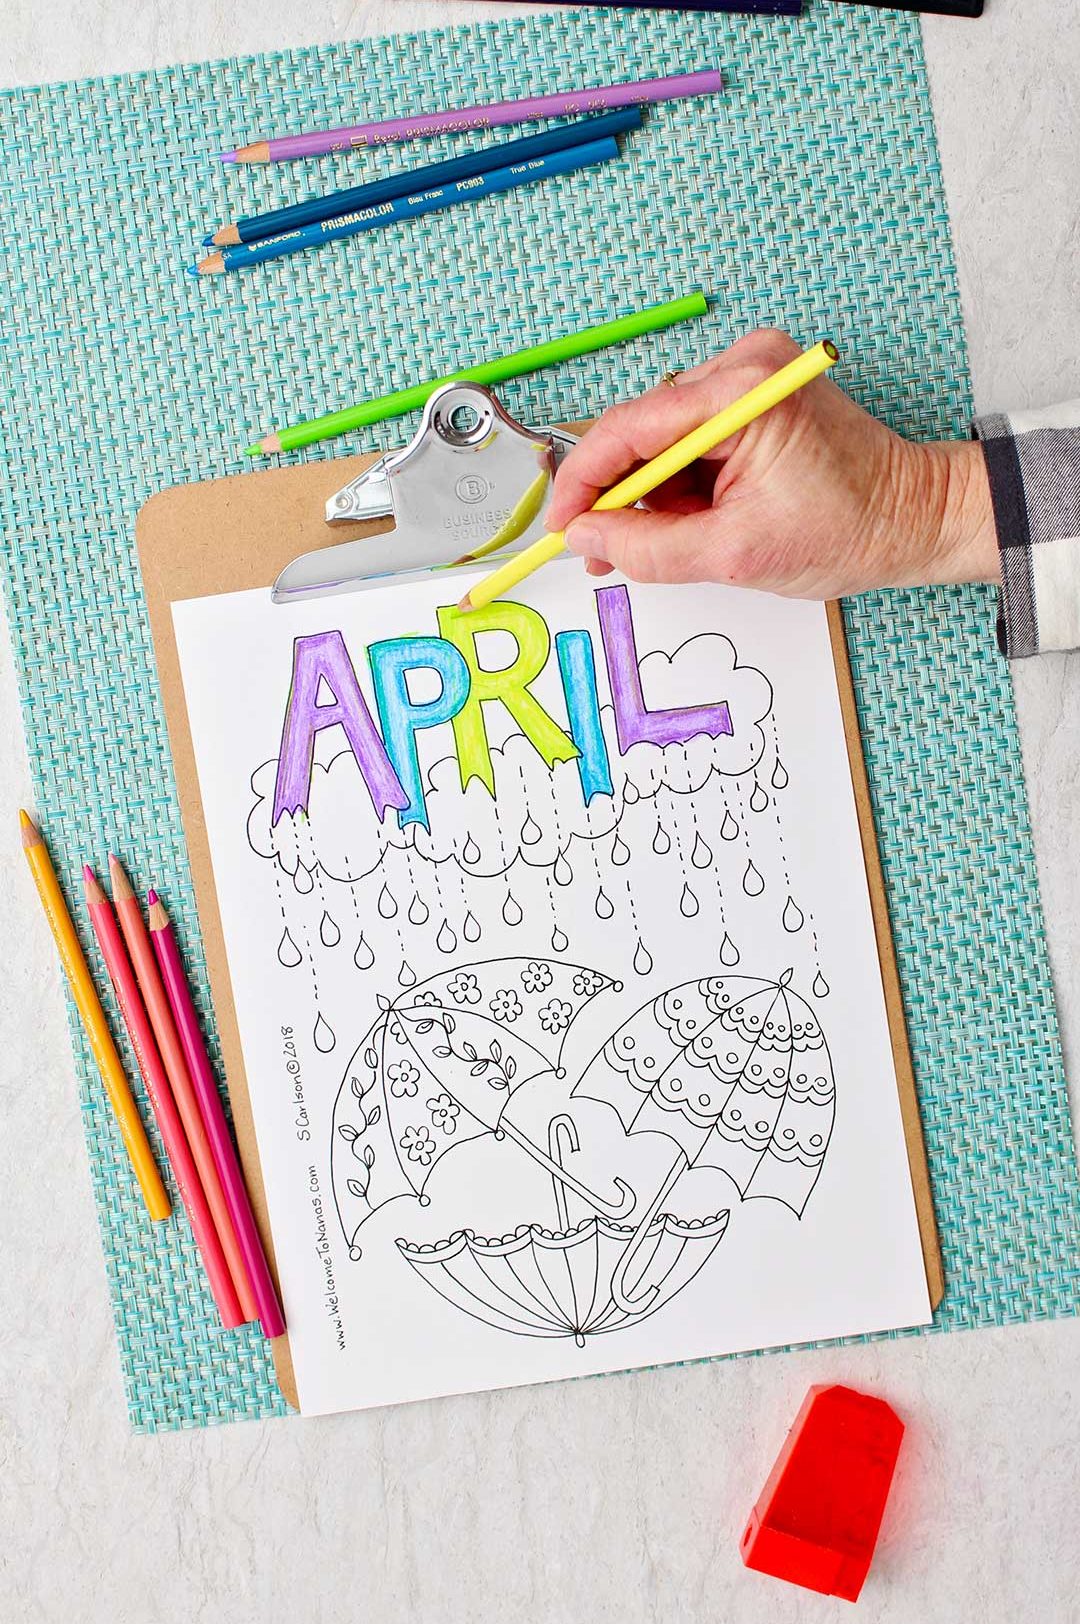 Hand coloring the "R" in April bright green in the April Showers Coloring Page sitting on an aqua placemat with colored pencils around.